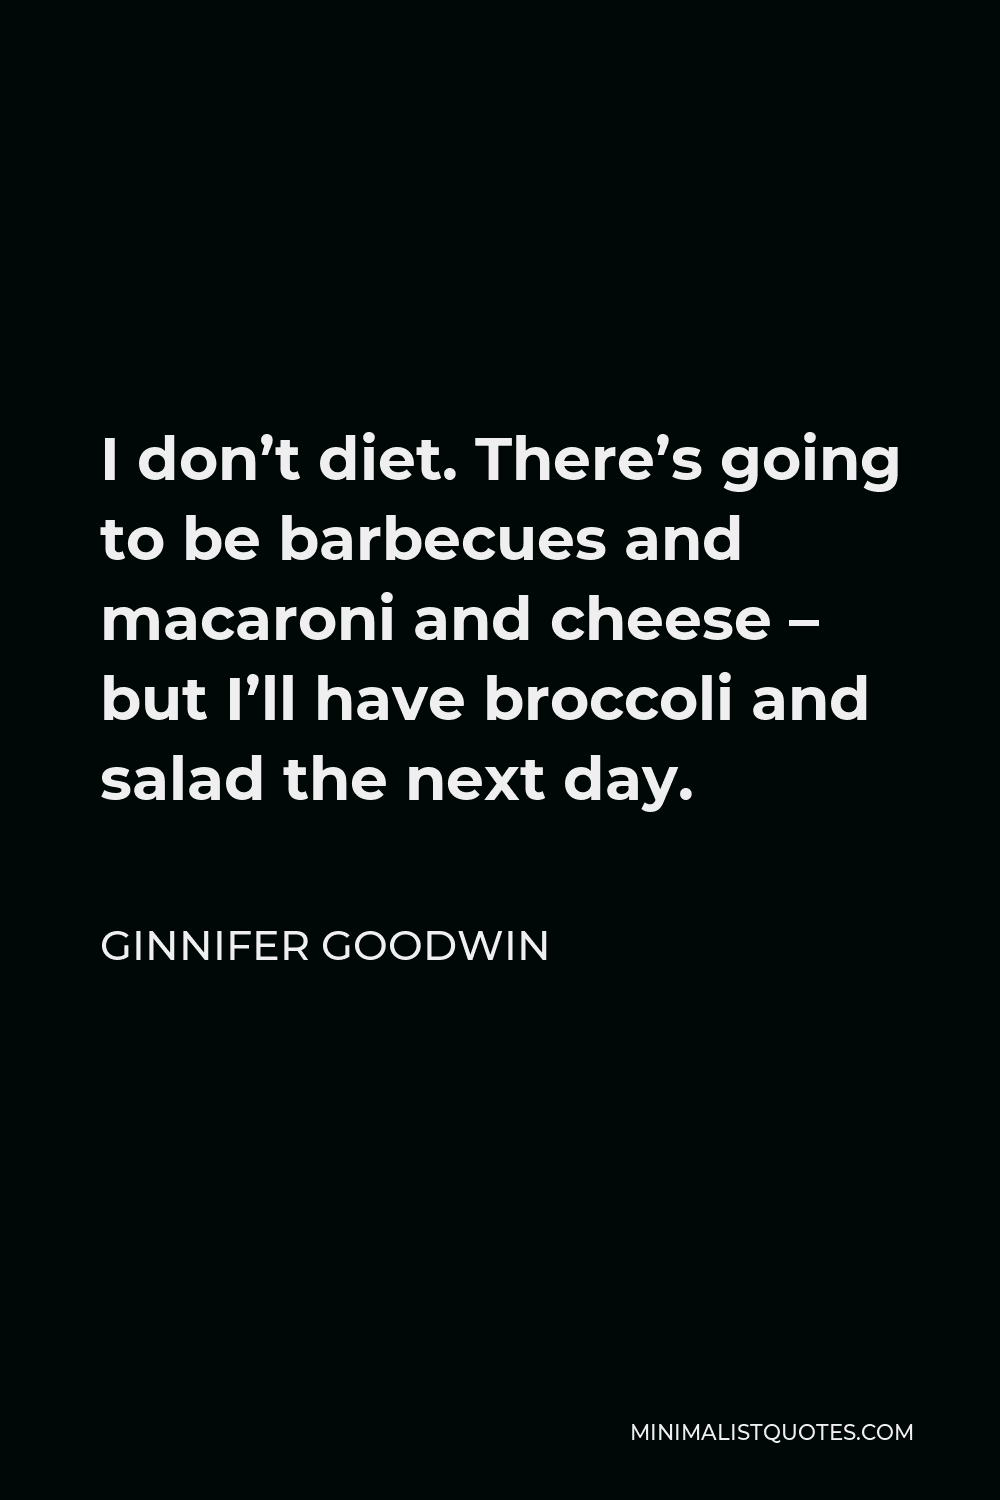 Ginnifer Goodwin Quote - I don’t diet. There’s going to be barbecues and macaroni and cheese – but I’ll have broccoli and salad the next day.